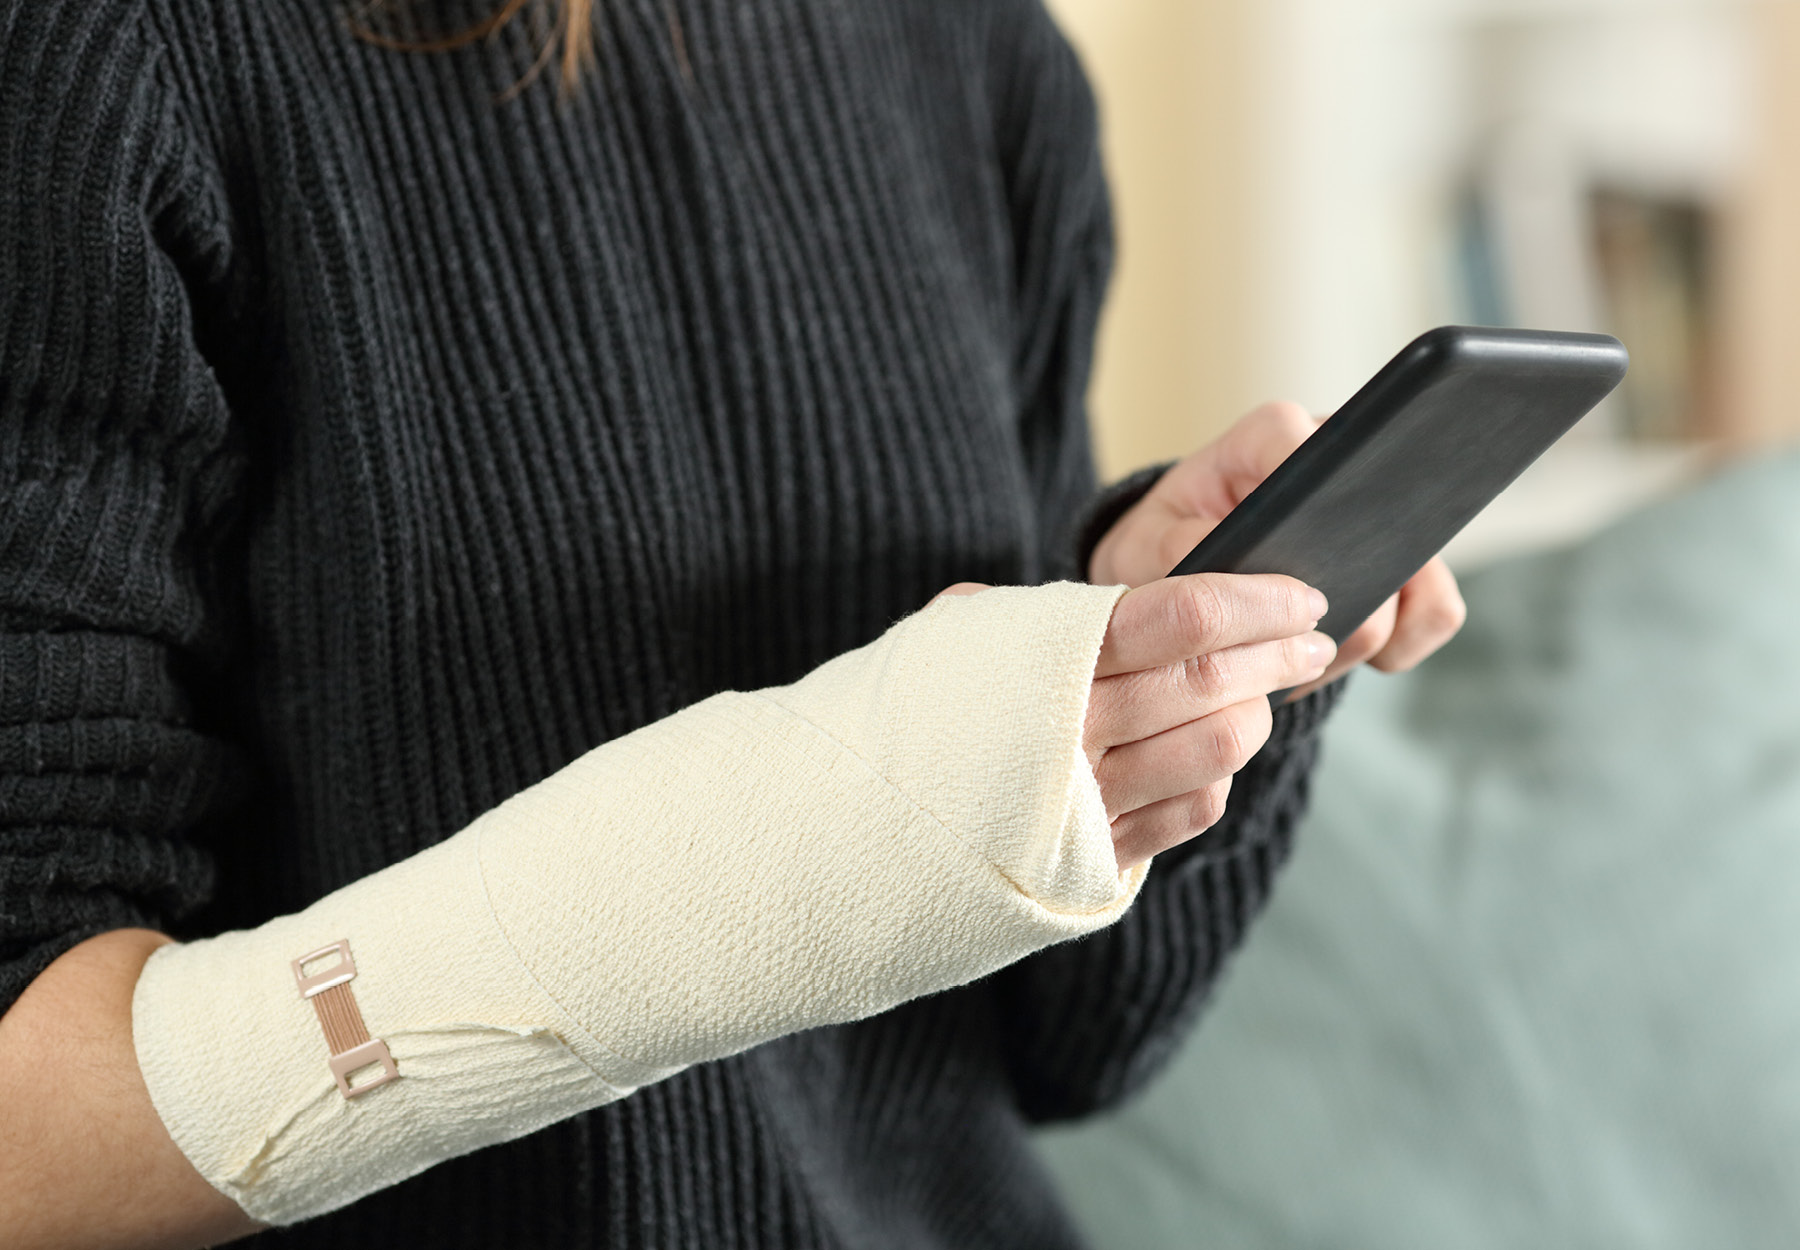 Close up of an injured woman's hands with bandaged arm using mobile phone at home. She is wearing a black sweater. iStock image.